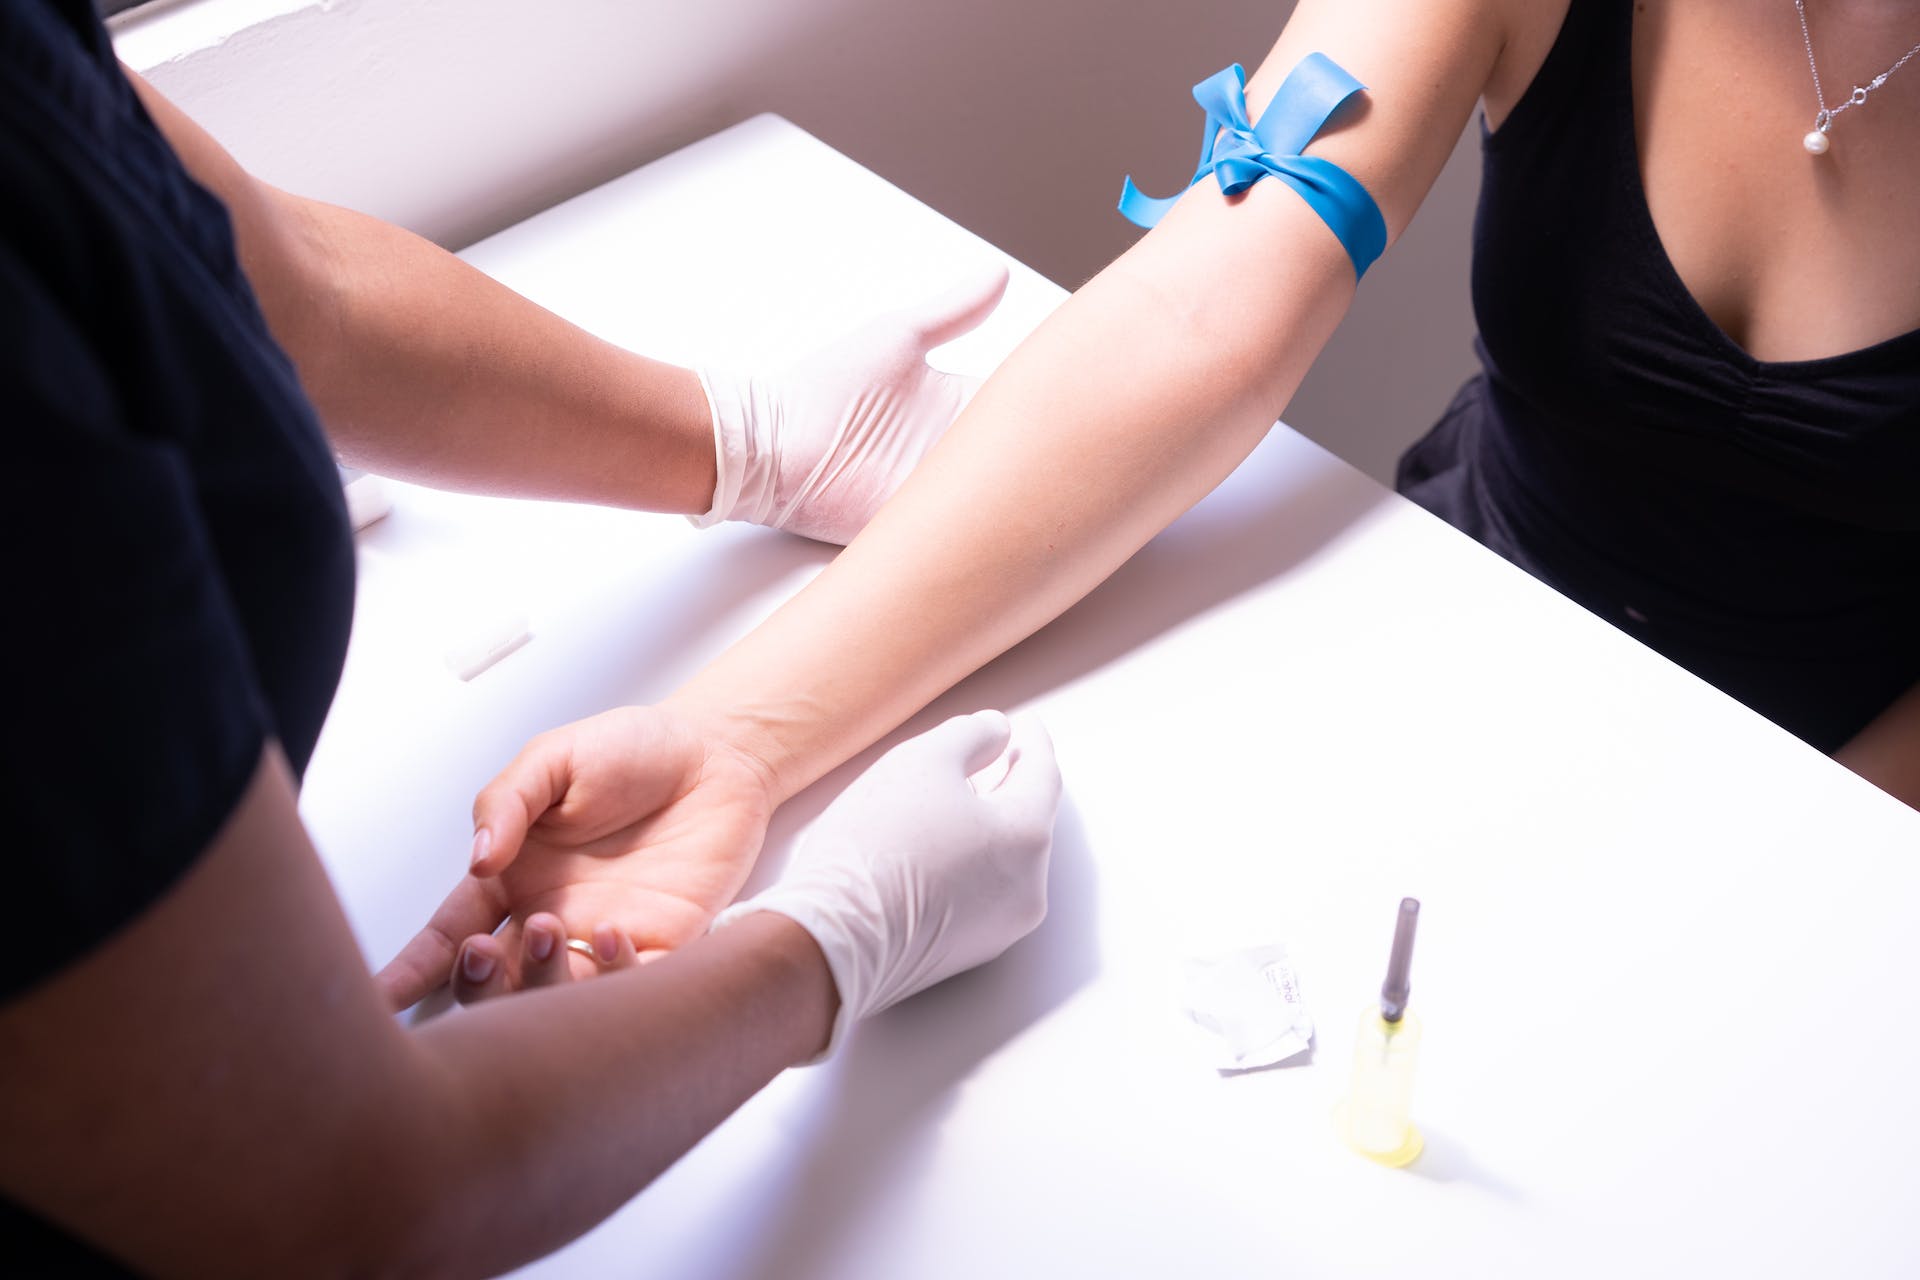 A medical professional preparing a woman for a blood test | Source: Pexels